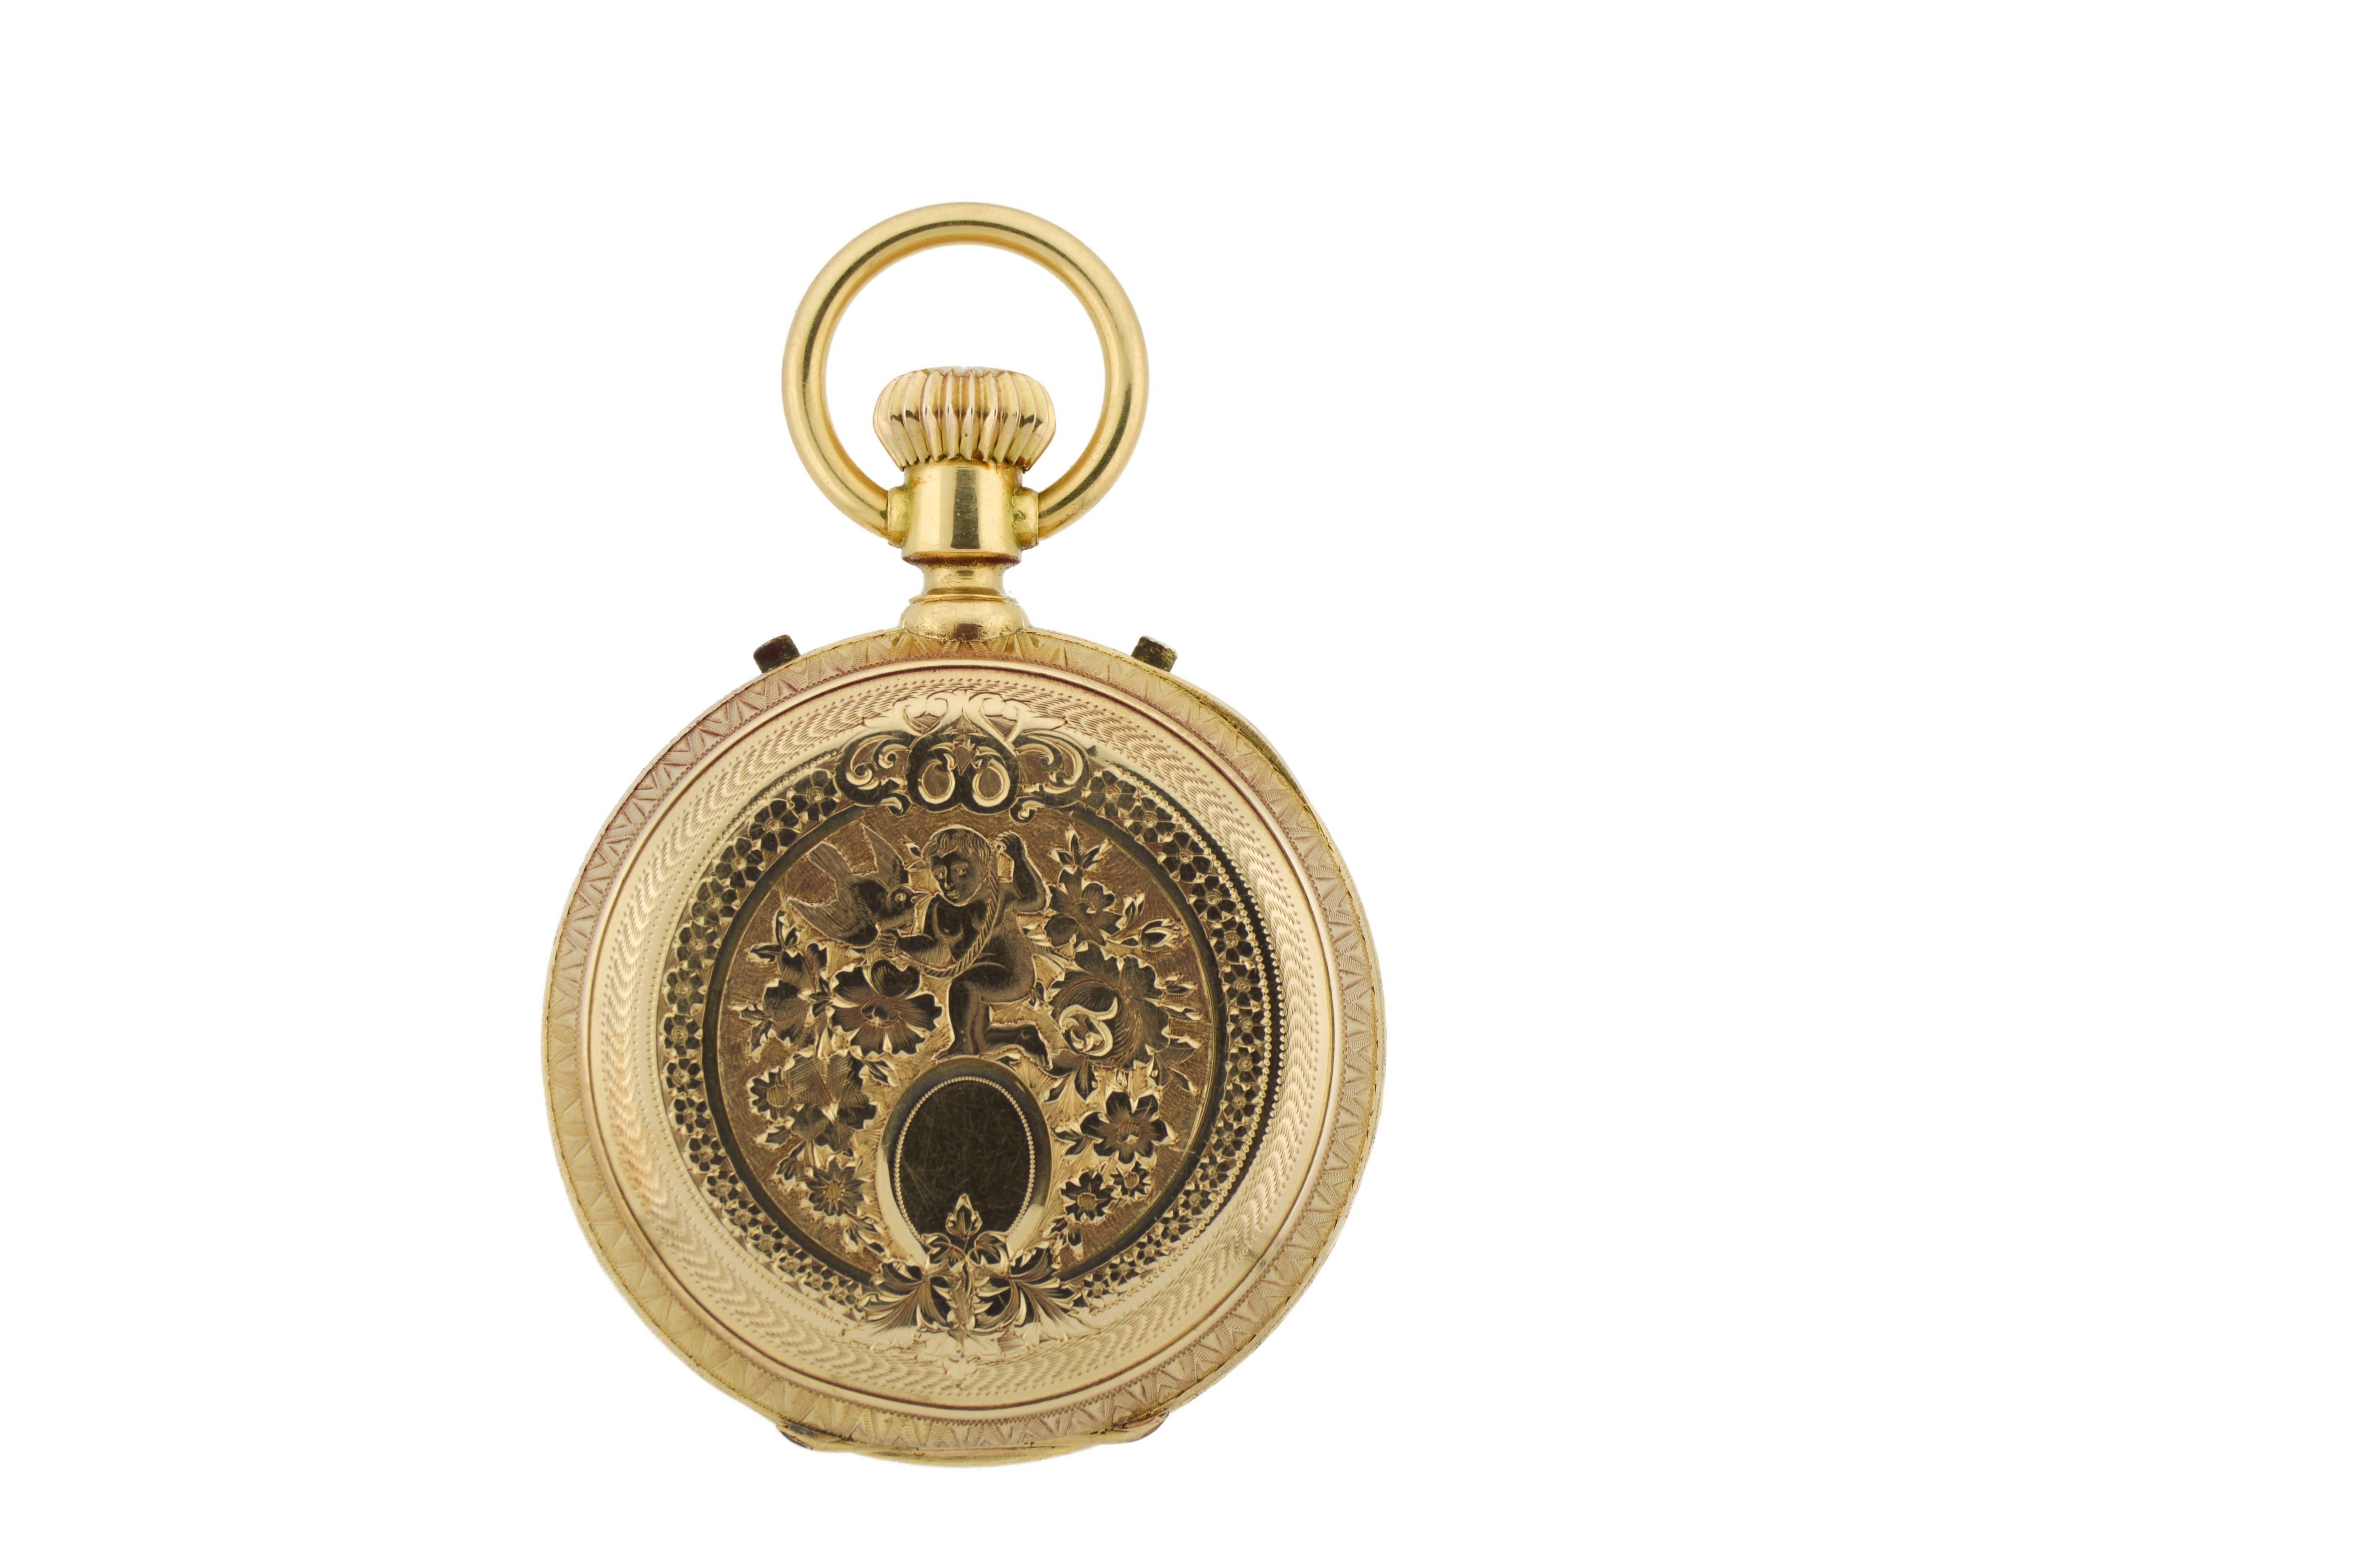 18kt solid gold man's Swiss made pocket watch. This watch has a beautiful hand carved case in excellent condition. The Enamel dial is in perfect condition. This chronograph watch is set up with a true beat escapement. It is a unique and unusual